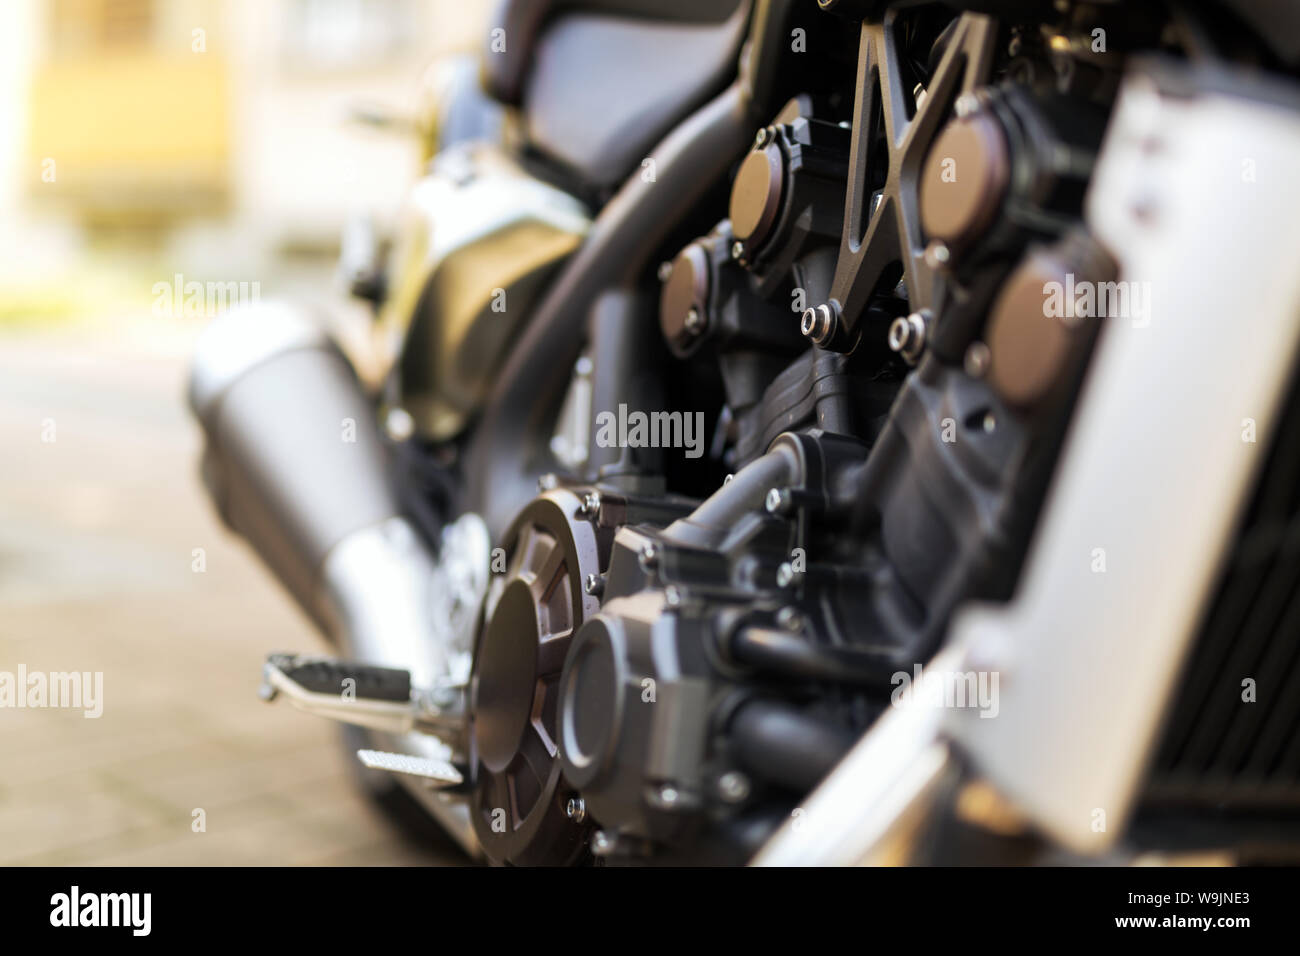 Picture of shiny chrome motorcycle engine block Stock Photo